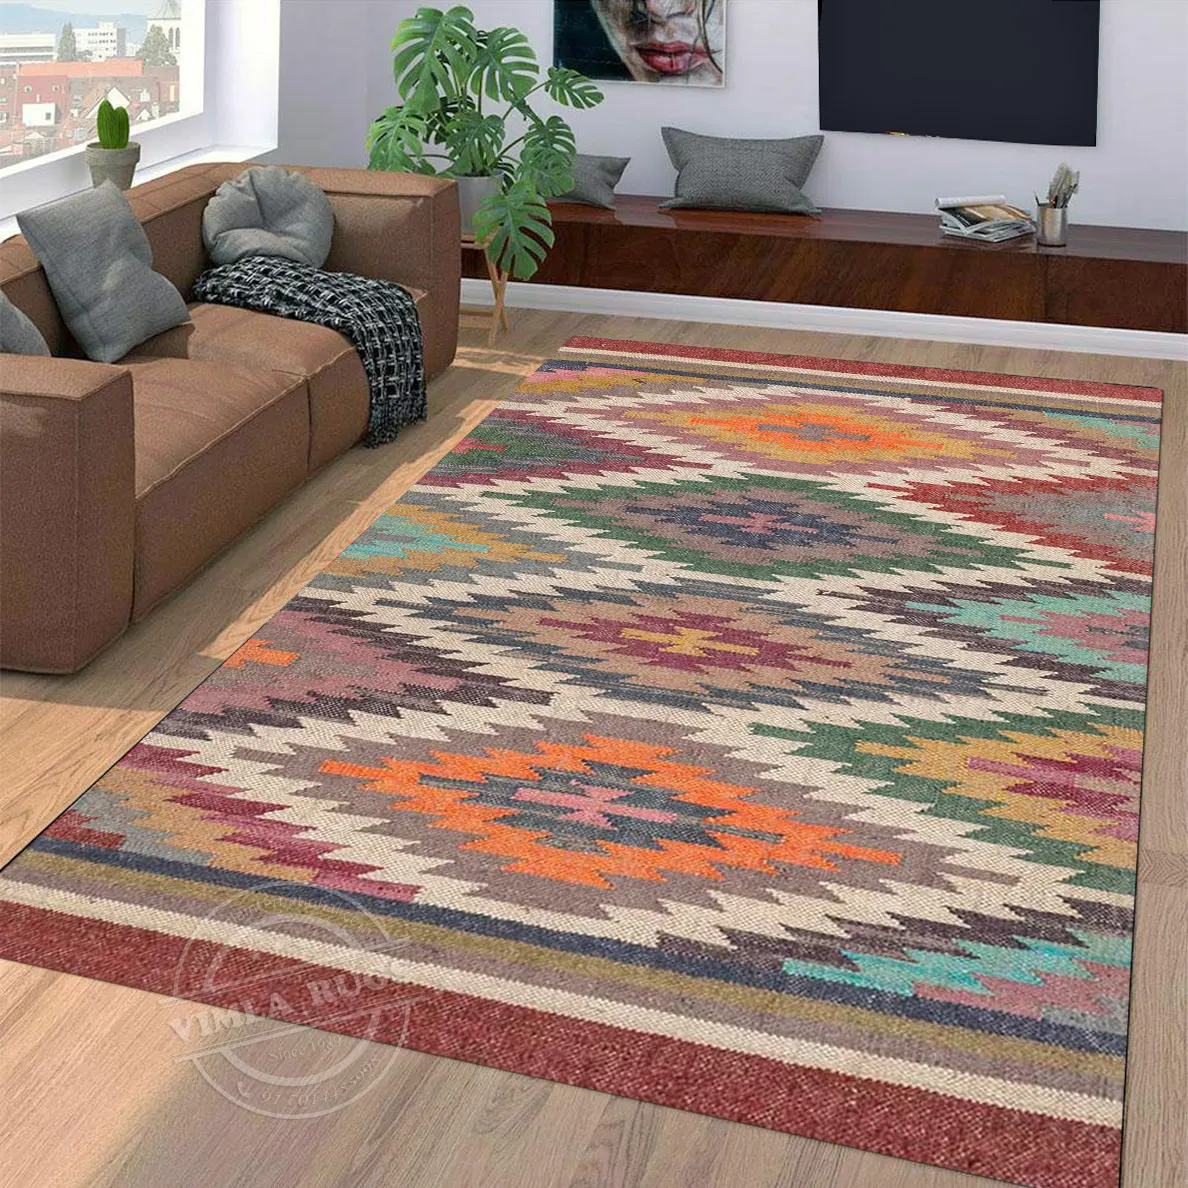 Wool Jute Kilim Rug With Geometric Patterns and 100% Anti Skid Feature Multi Color Soft Texture Indoor Area Rug Indian Floor Rug